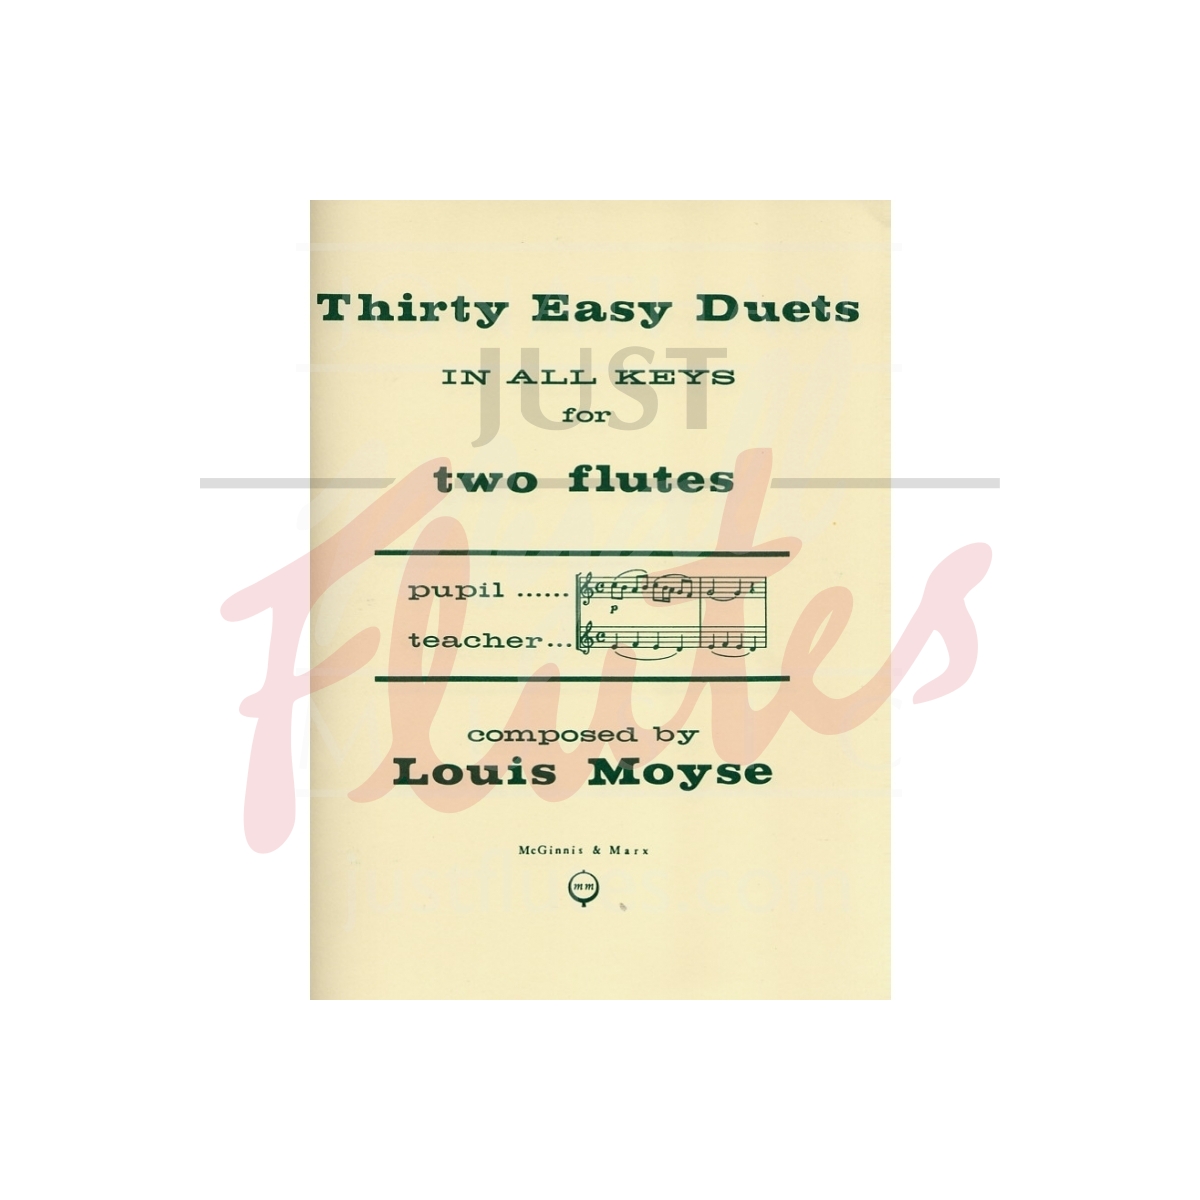 Thirty Easy Duets in All Keys for Two Flutes